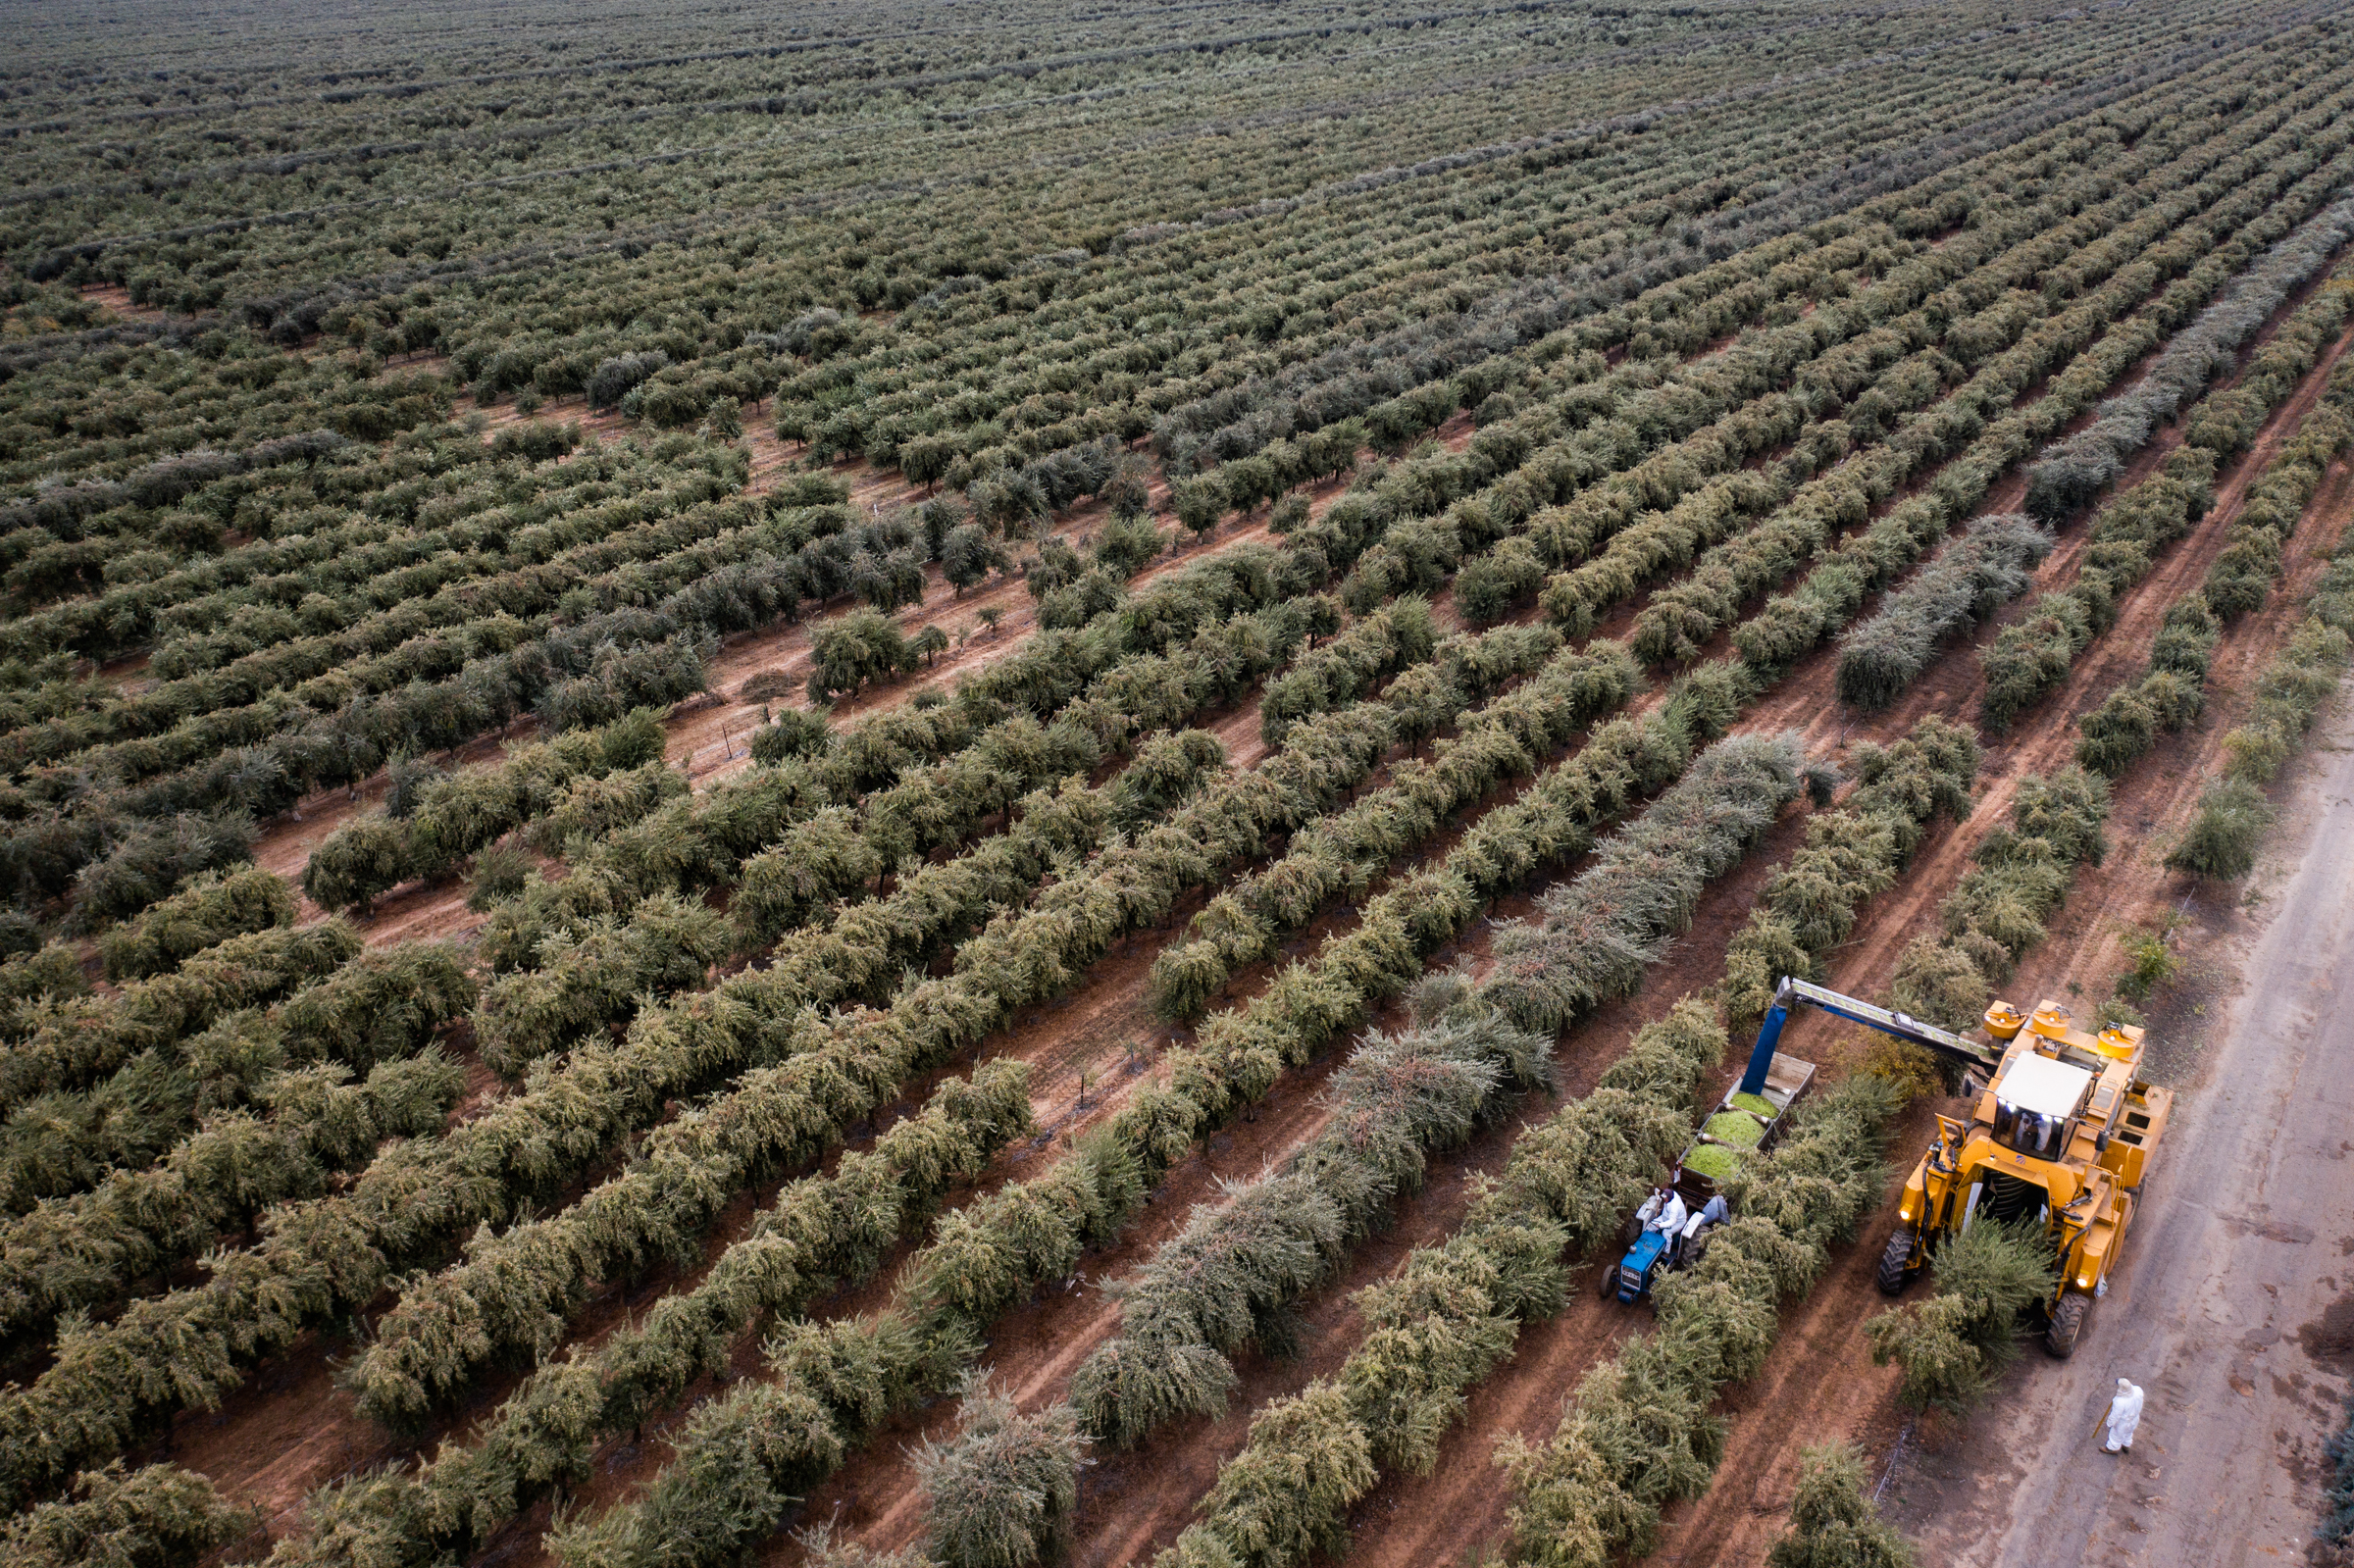 Aerial view of a harvest crew in super high density olive groves